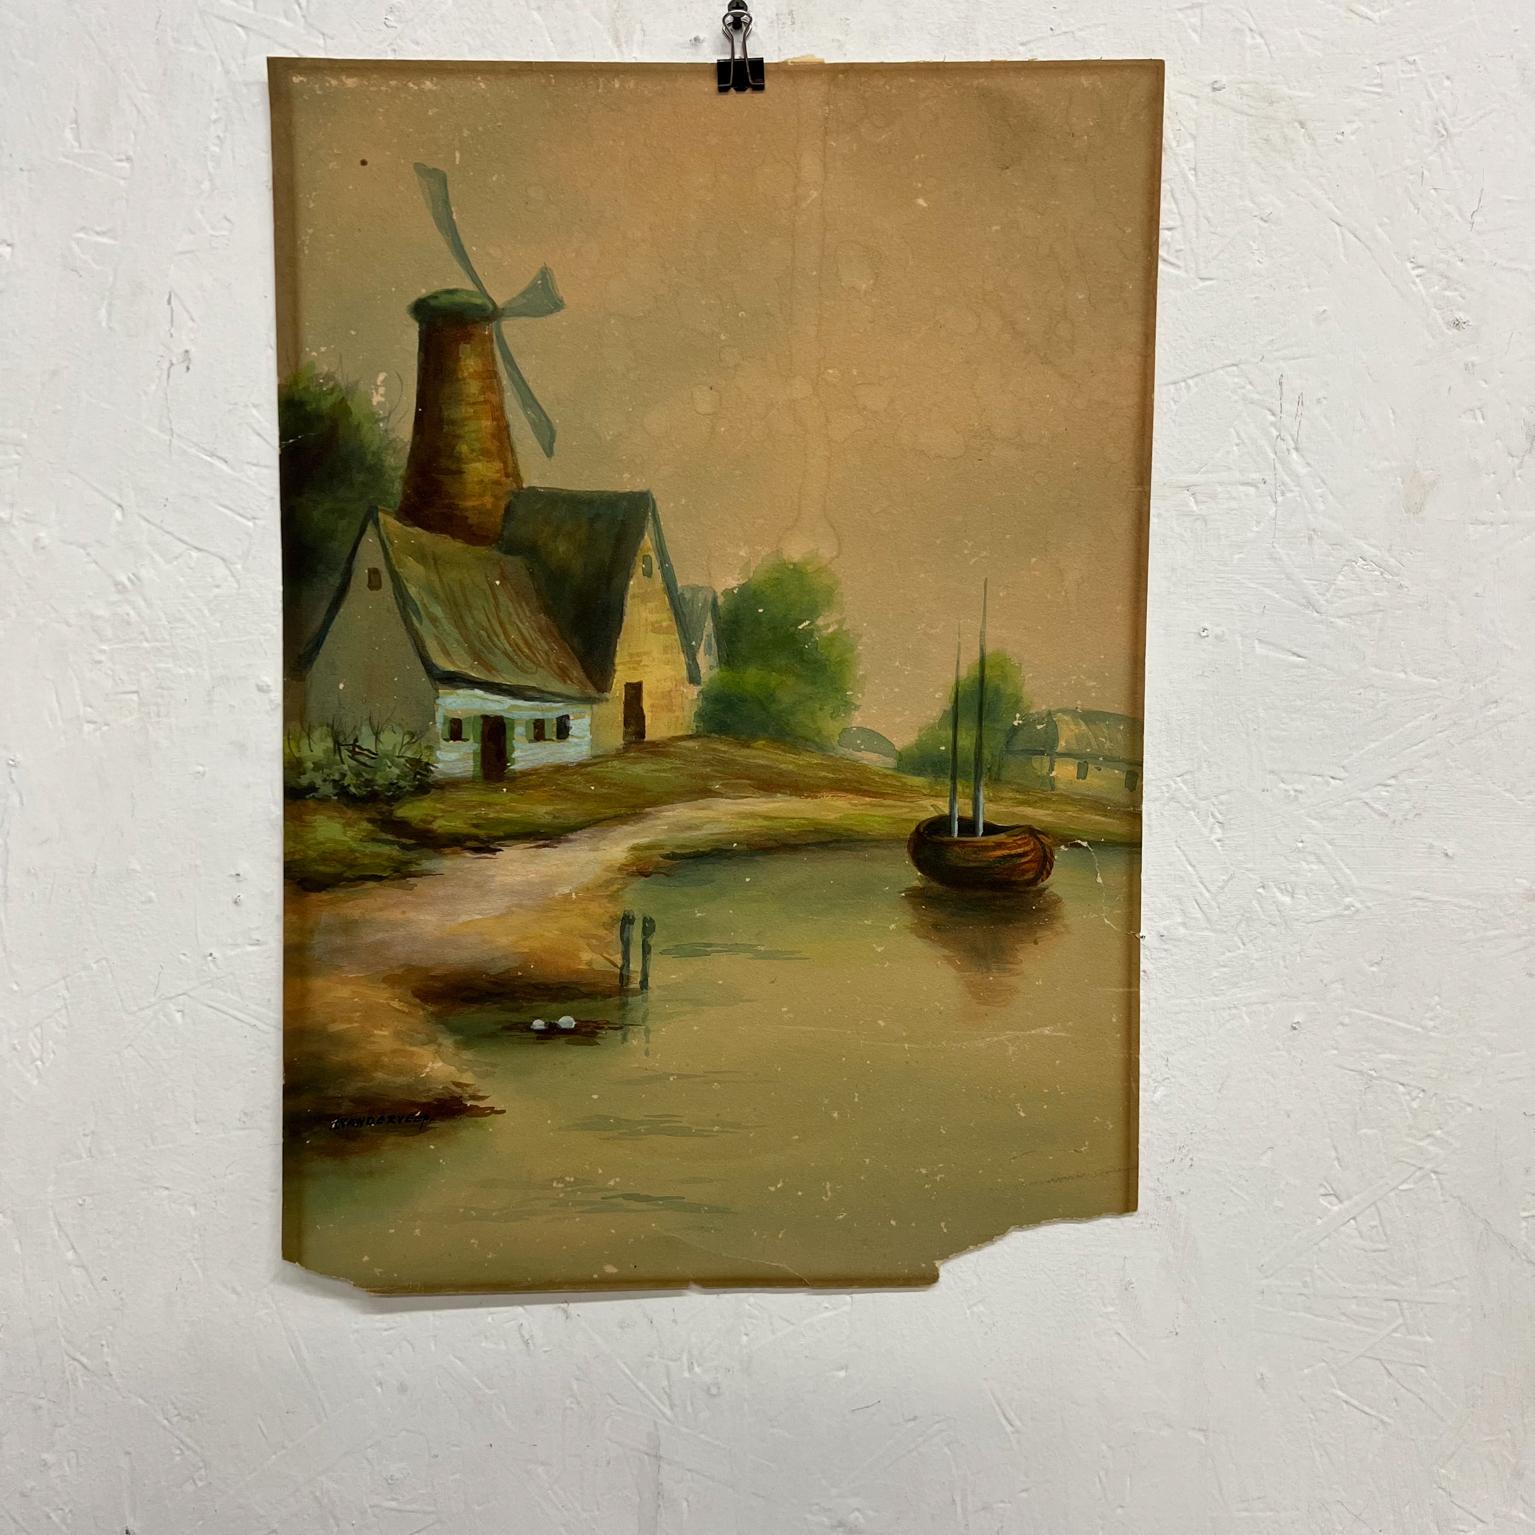 1950s vintage Art watercolor scenic Holland countryside windmill lake & boat 
Measures: 14.25 x 20.15
Signed, unable to read.
Distressed unrestored vintage condition Paper has a rip at lower right corner.
See all images.


  